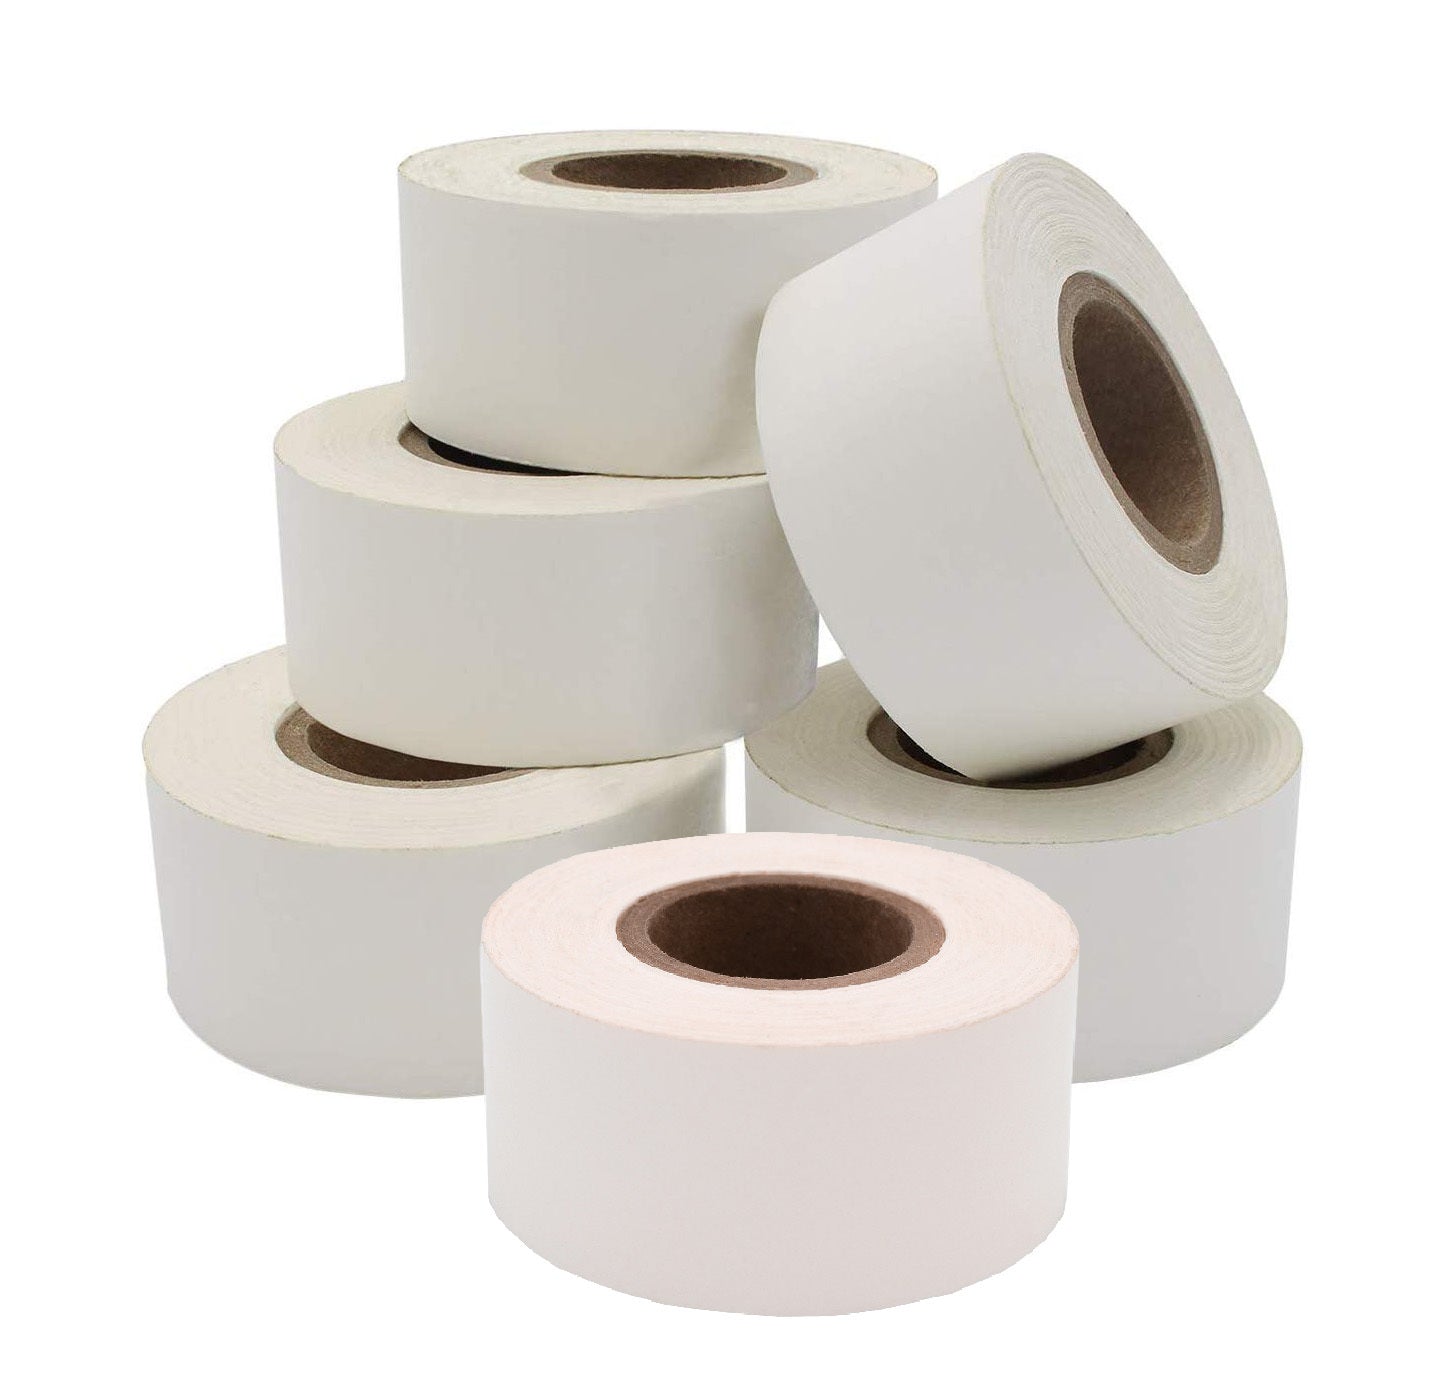  Lab Labeling Tape Variety Pack, 500 Inches Long x 3/4